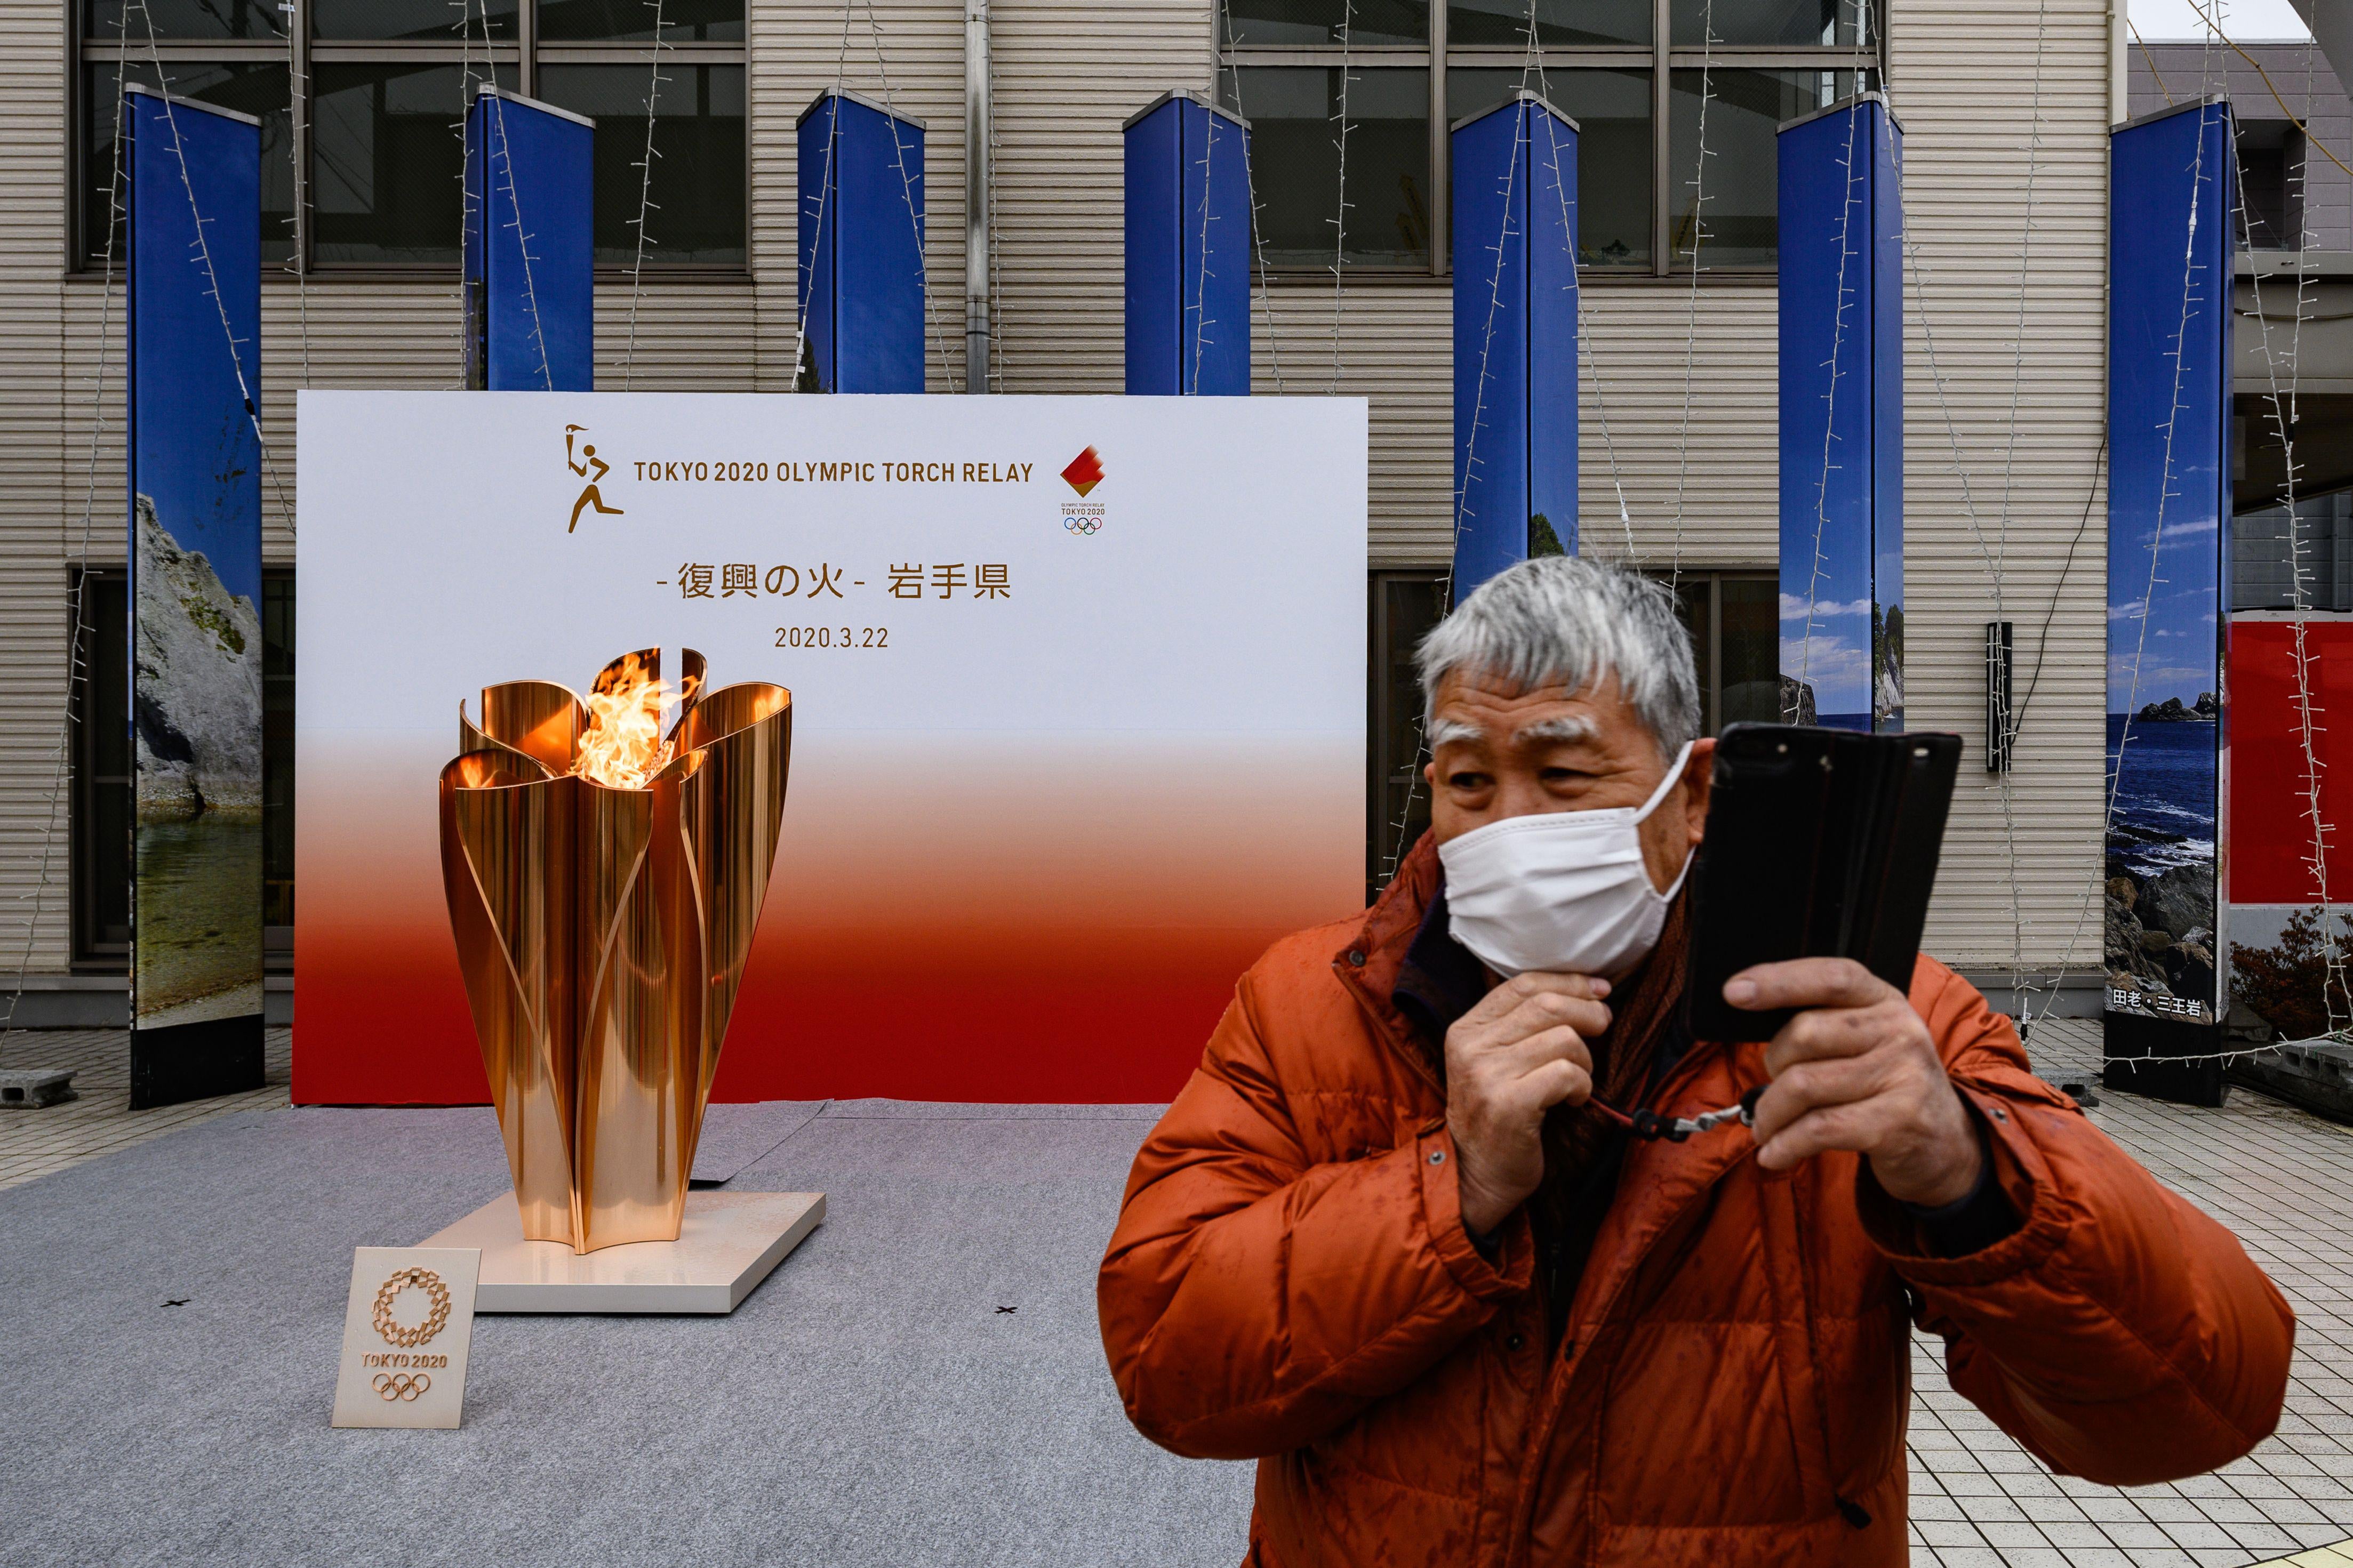 A man wearing a face mask stands in front of the Tokyo 2020 Olympic flame being displayed outside Miyako railway station, Iwate prefecture on March 22, 2020, after arriving from Greece.